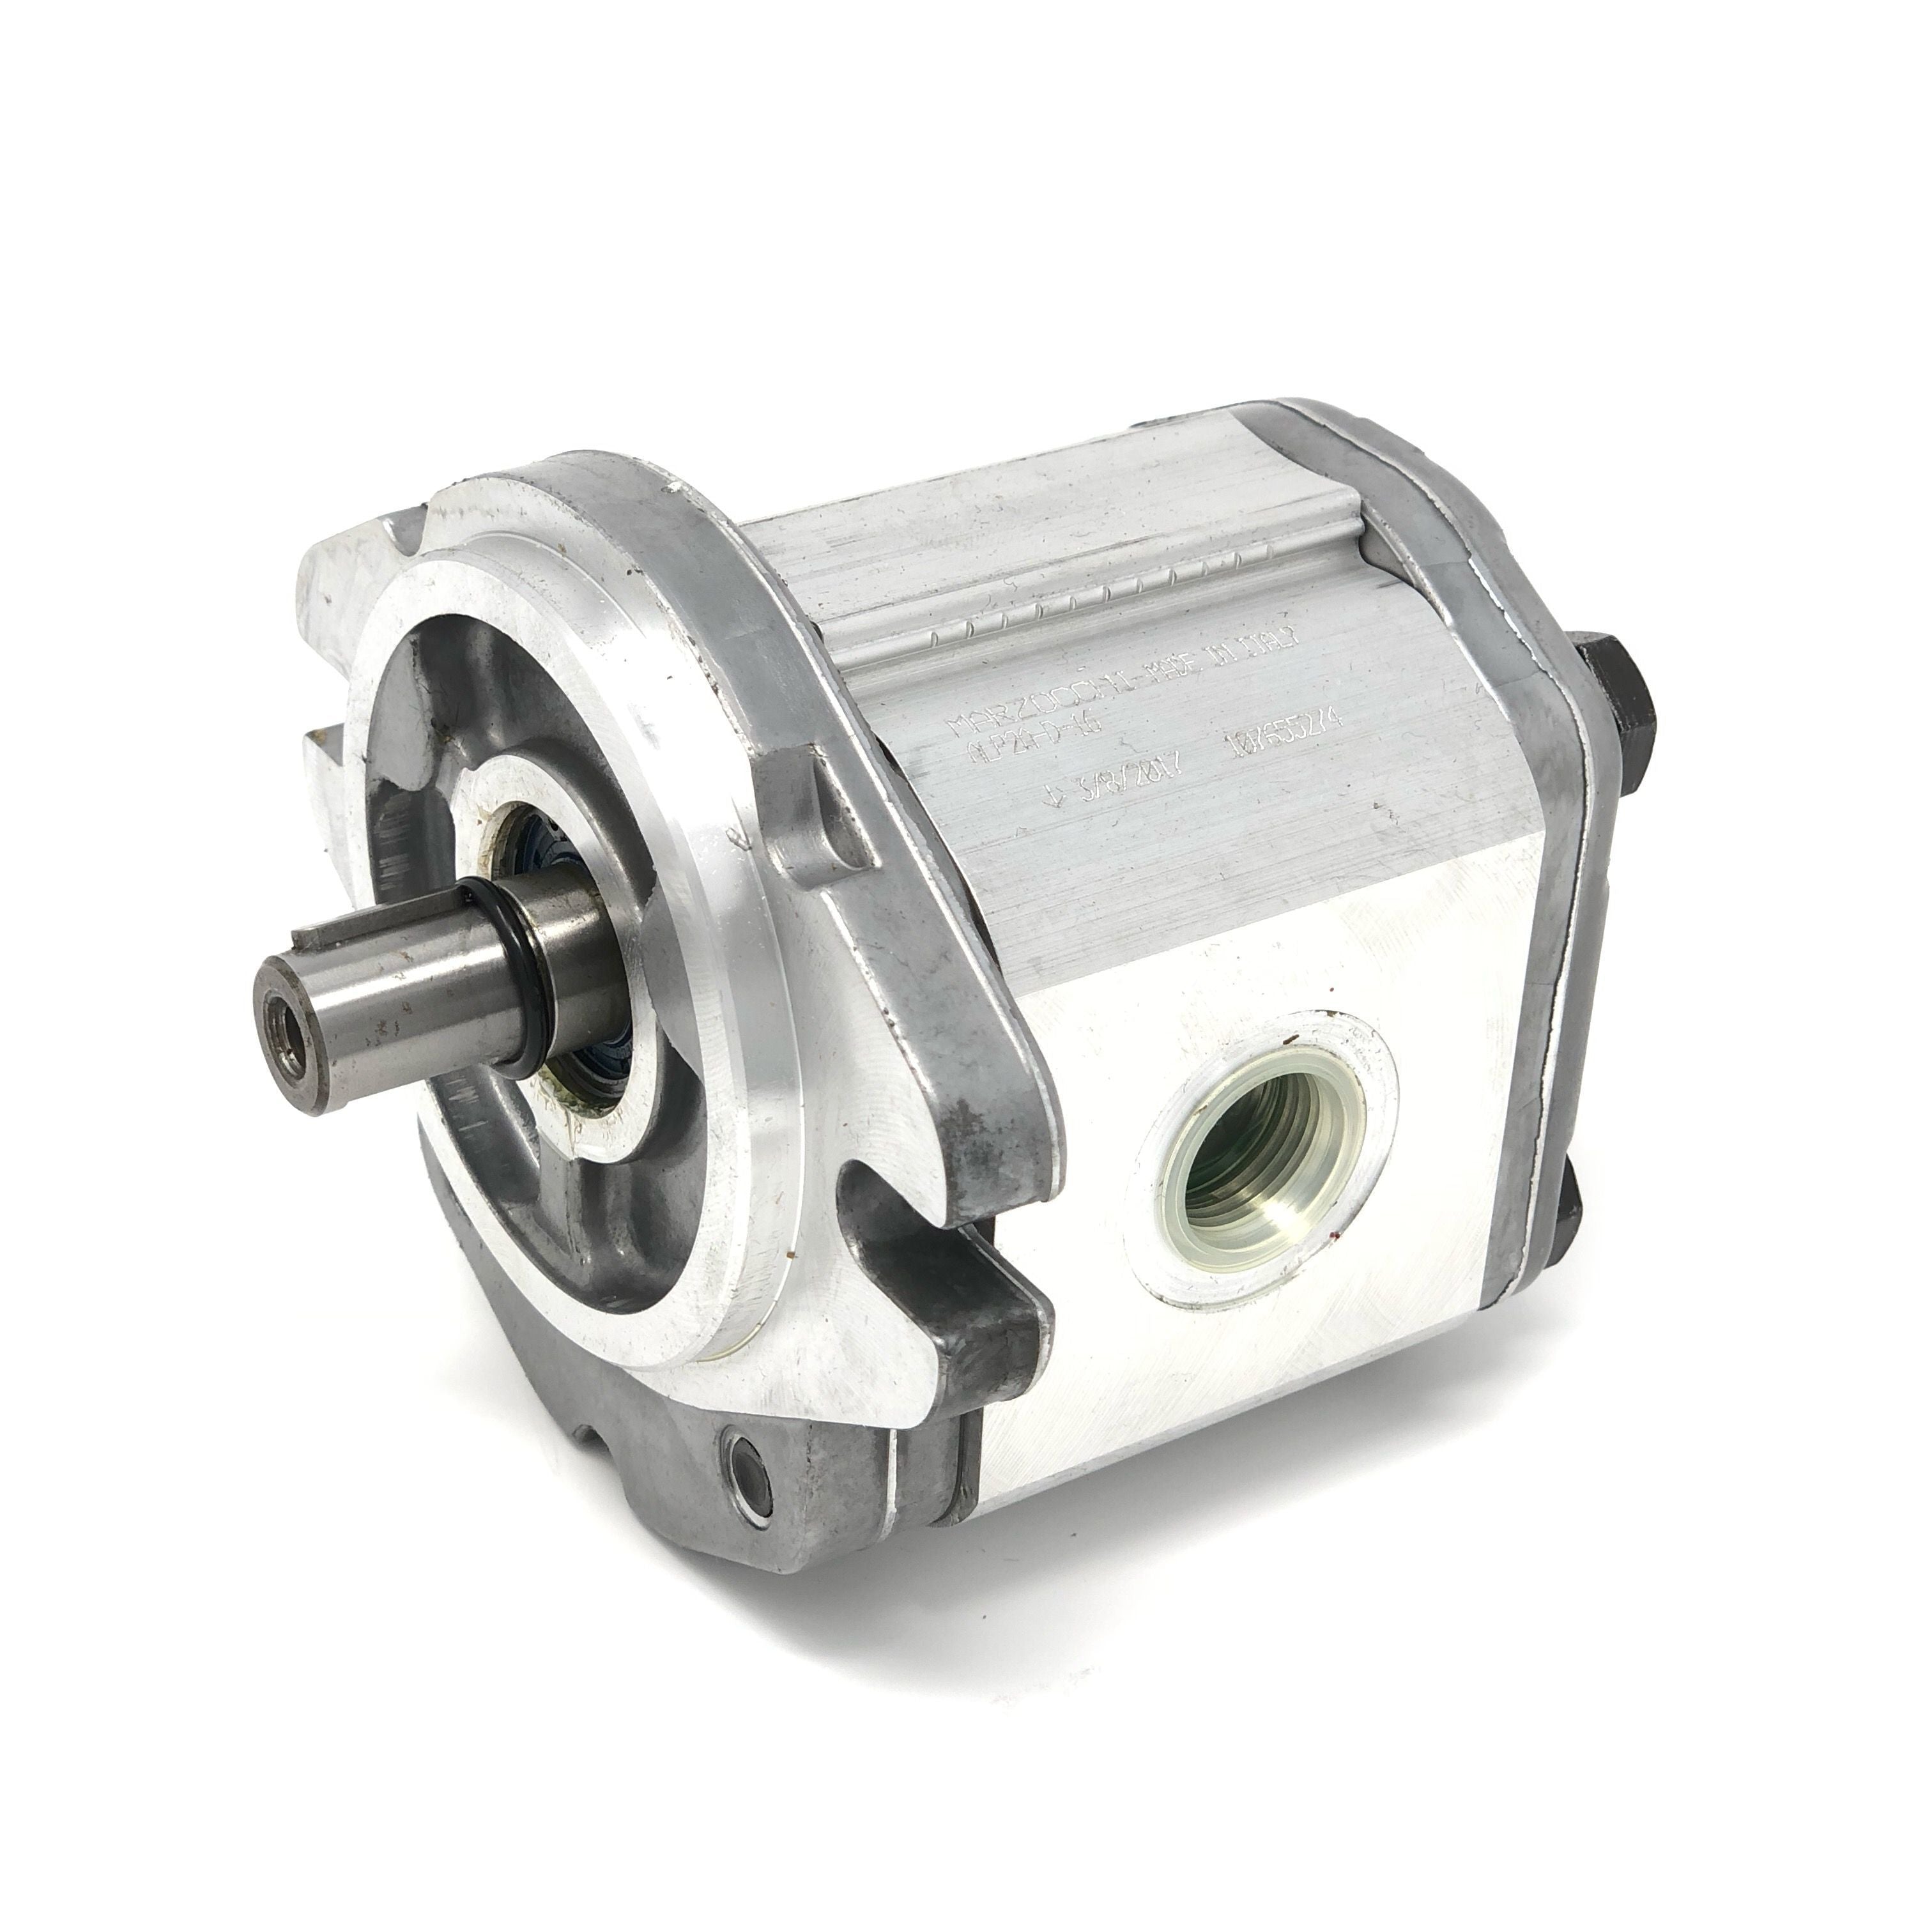 ALP1A-D-16 : Marzocchi Gear Pump, CW, 11cc (0.671in3), 5.23 GPM, 2465psi, 2500 RPM, #10 SAE (5/8") In, #8 SAE (1/2") Out, Keyed Shaft 1/2" Bore x 1/8" Key, SAE AA 2-Bolt Mount